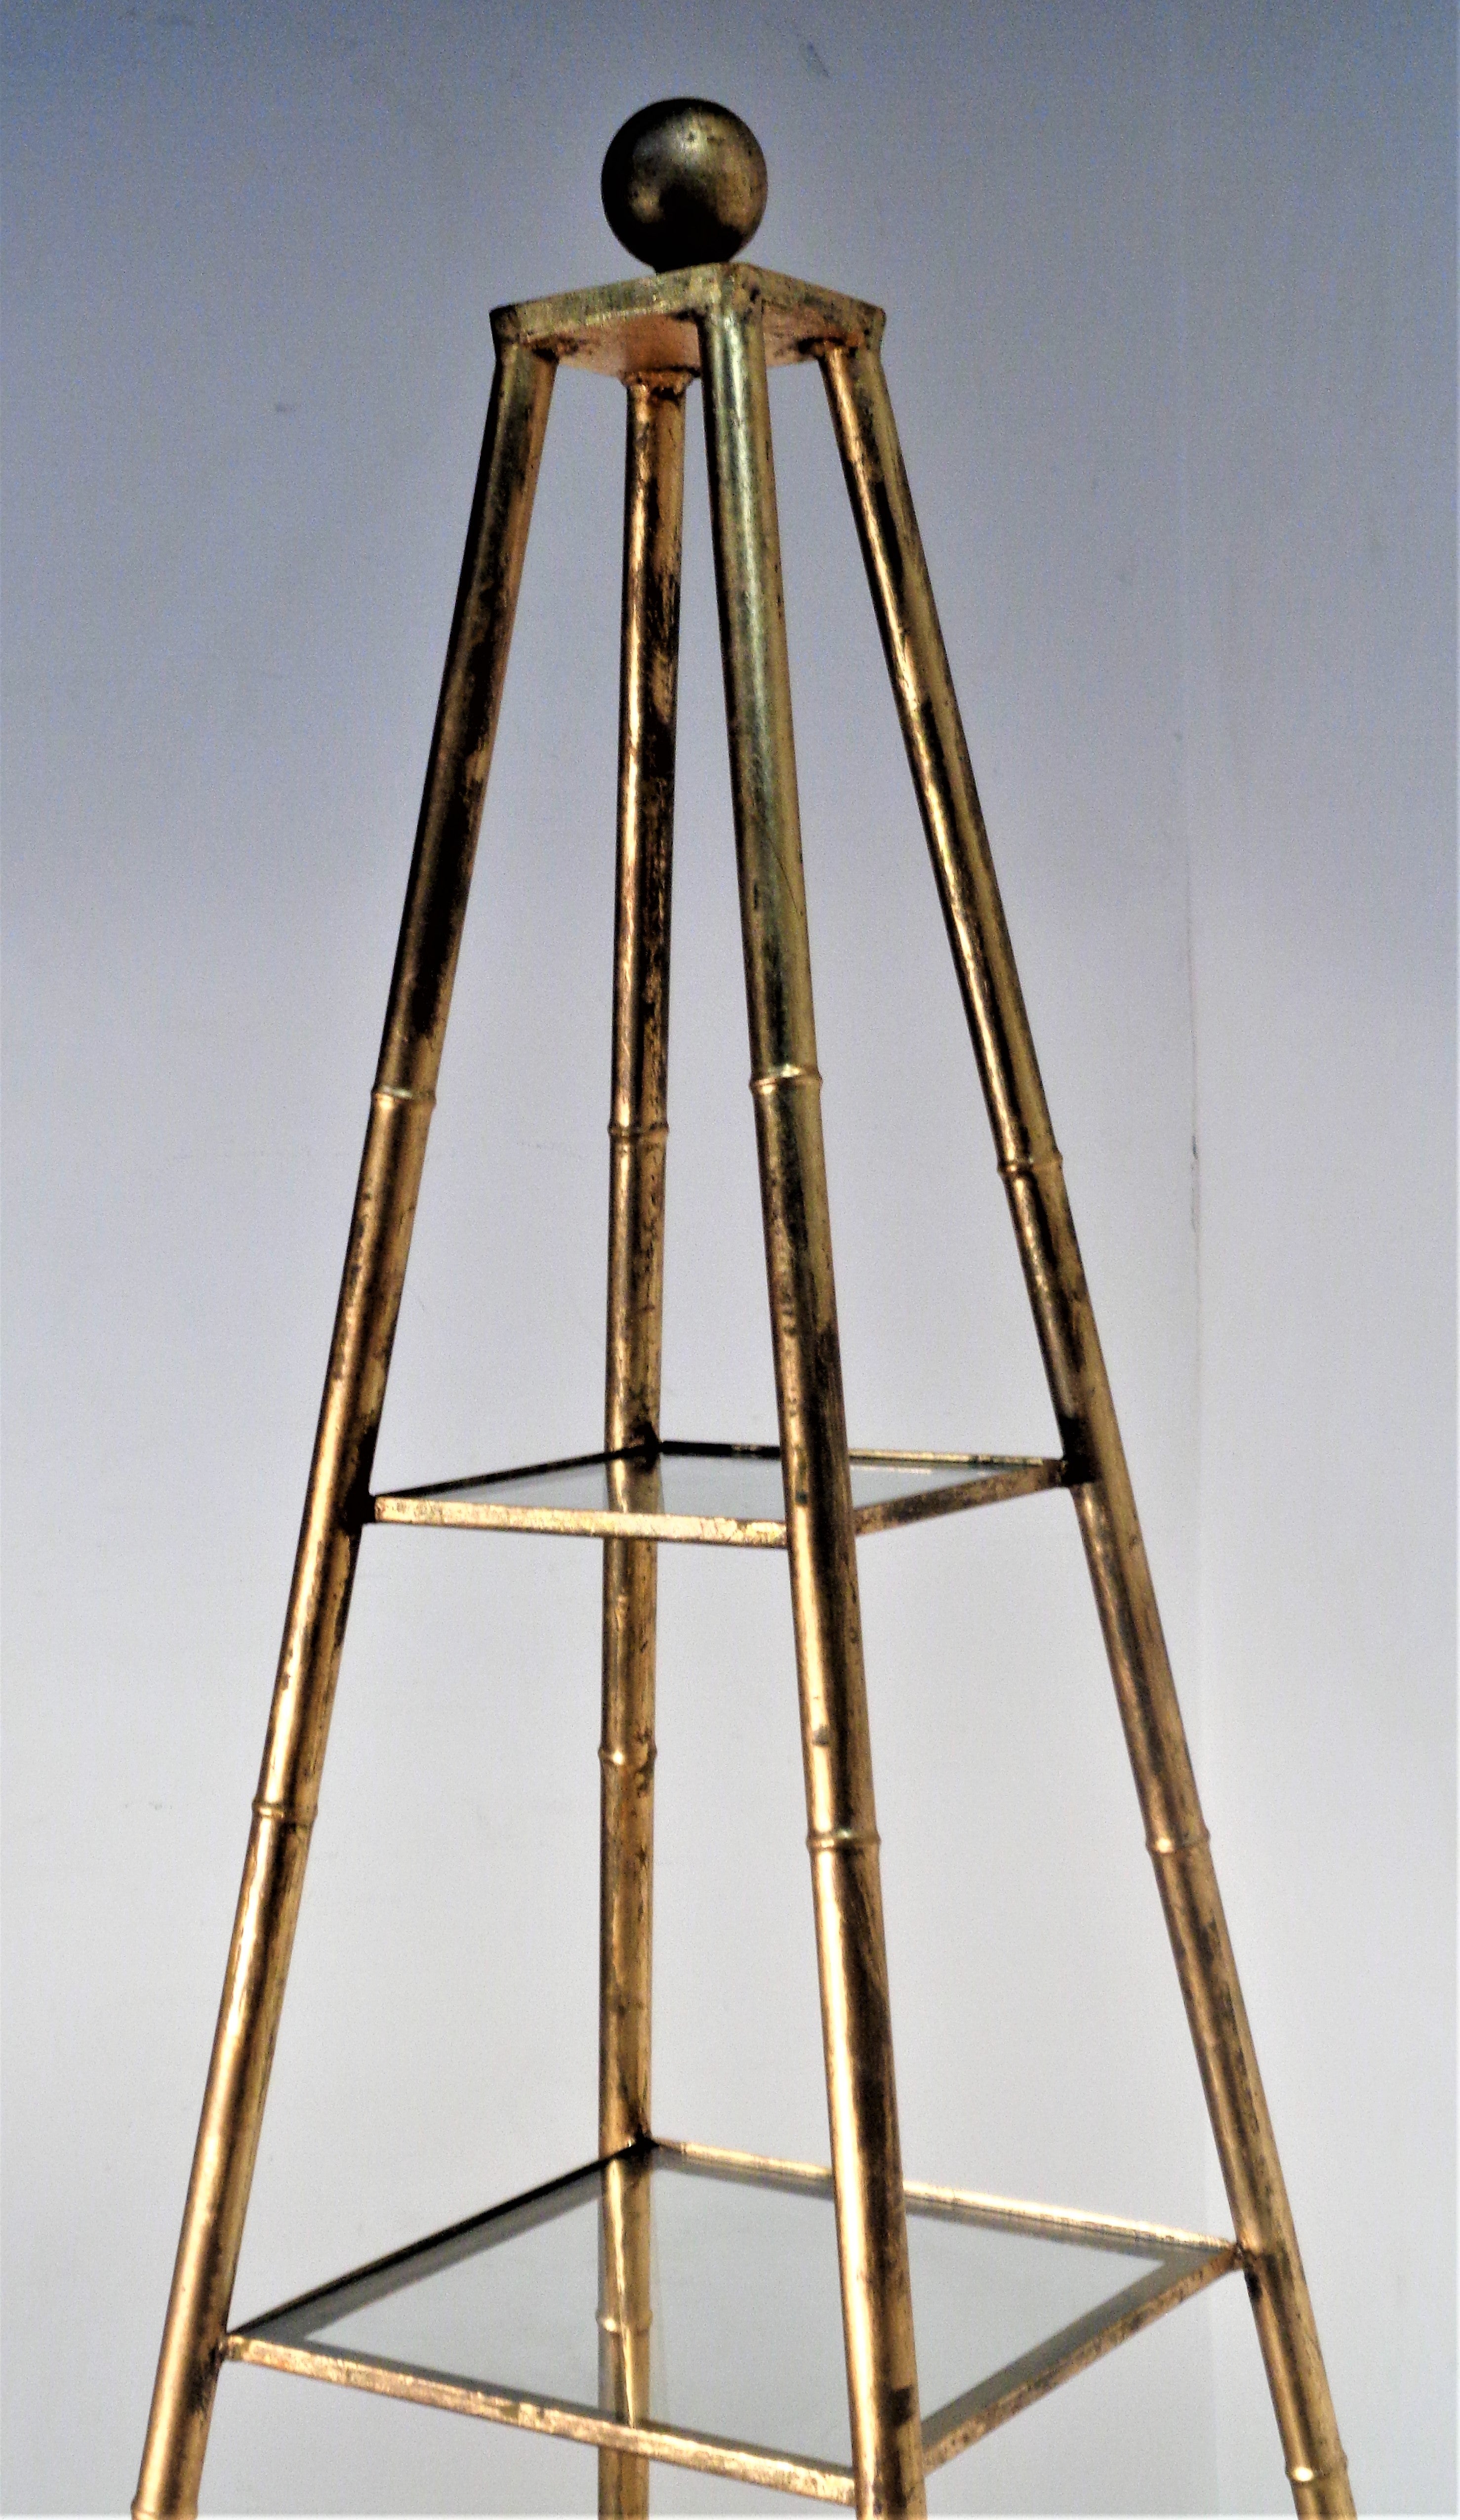 Faux bamboo gilt metal obelisk form etagere with four removable graduated size glass shelves / large gilt wood ball finial at top / raised on four gilt wood ball feet. Overall beautifully aged original gilded surface. Made in Italy, Circa 1960. This